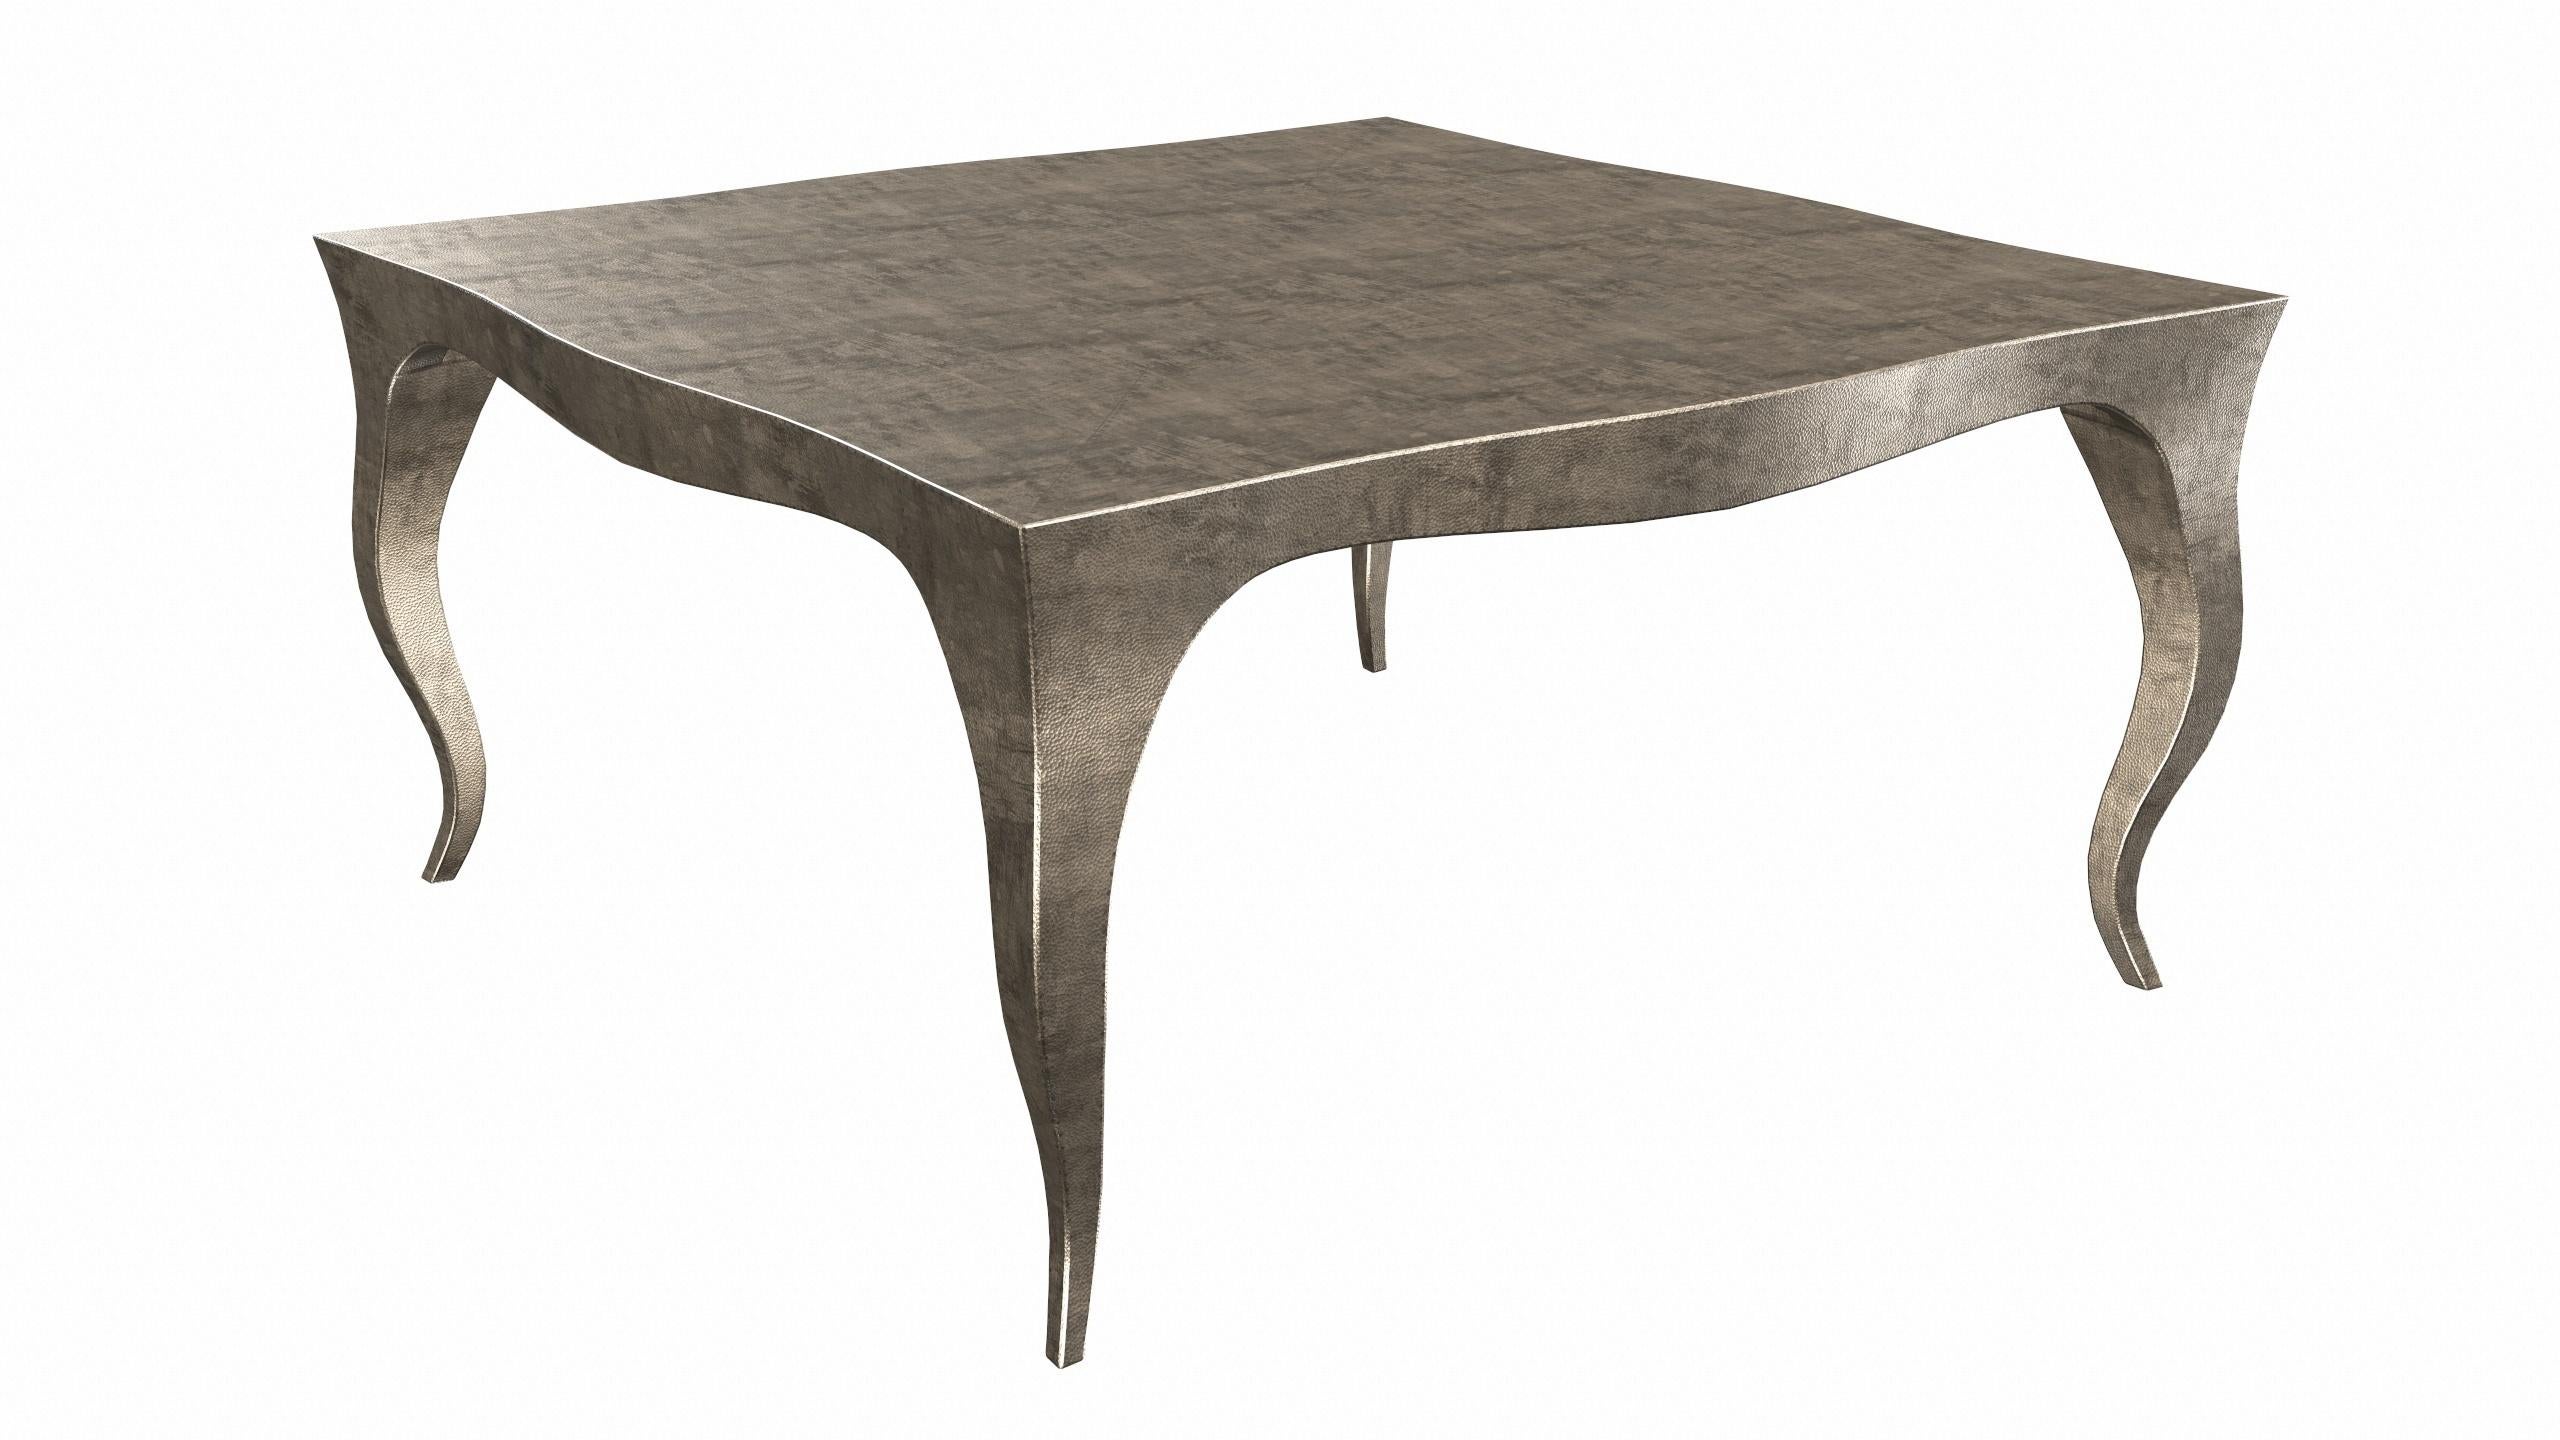 Contemporary Louise Art Deco Center Tables Mid. Hammered Antique Bronze 18.5x18.5x10 inch   For Sale